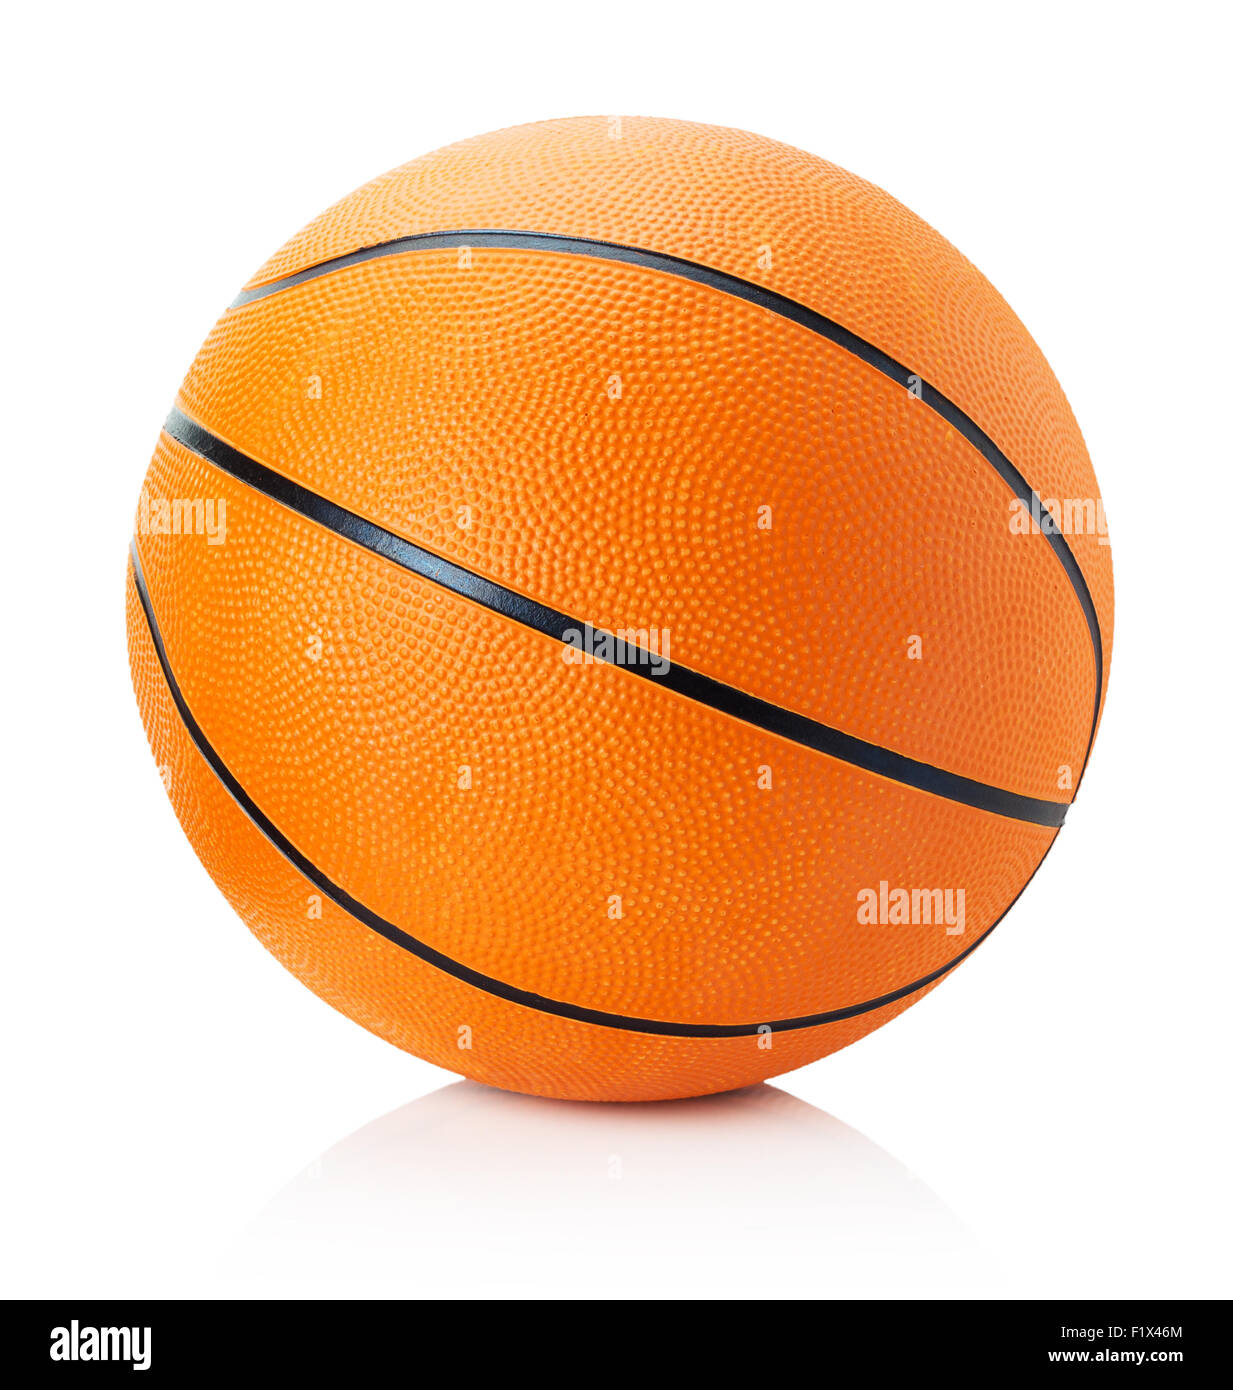 basketball isolated on a white background. Stock Photo